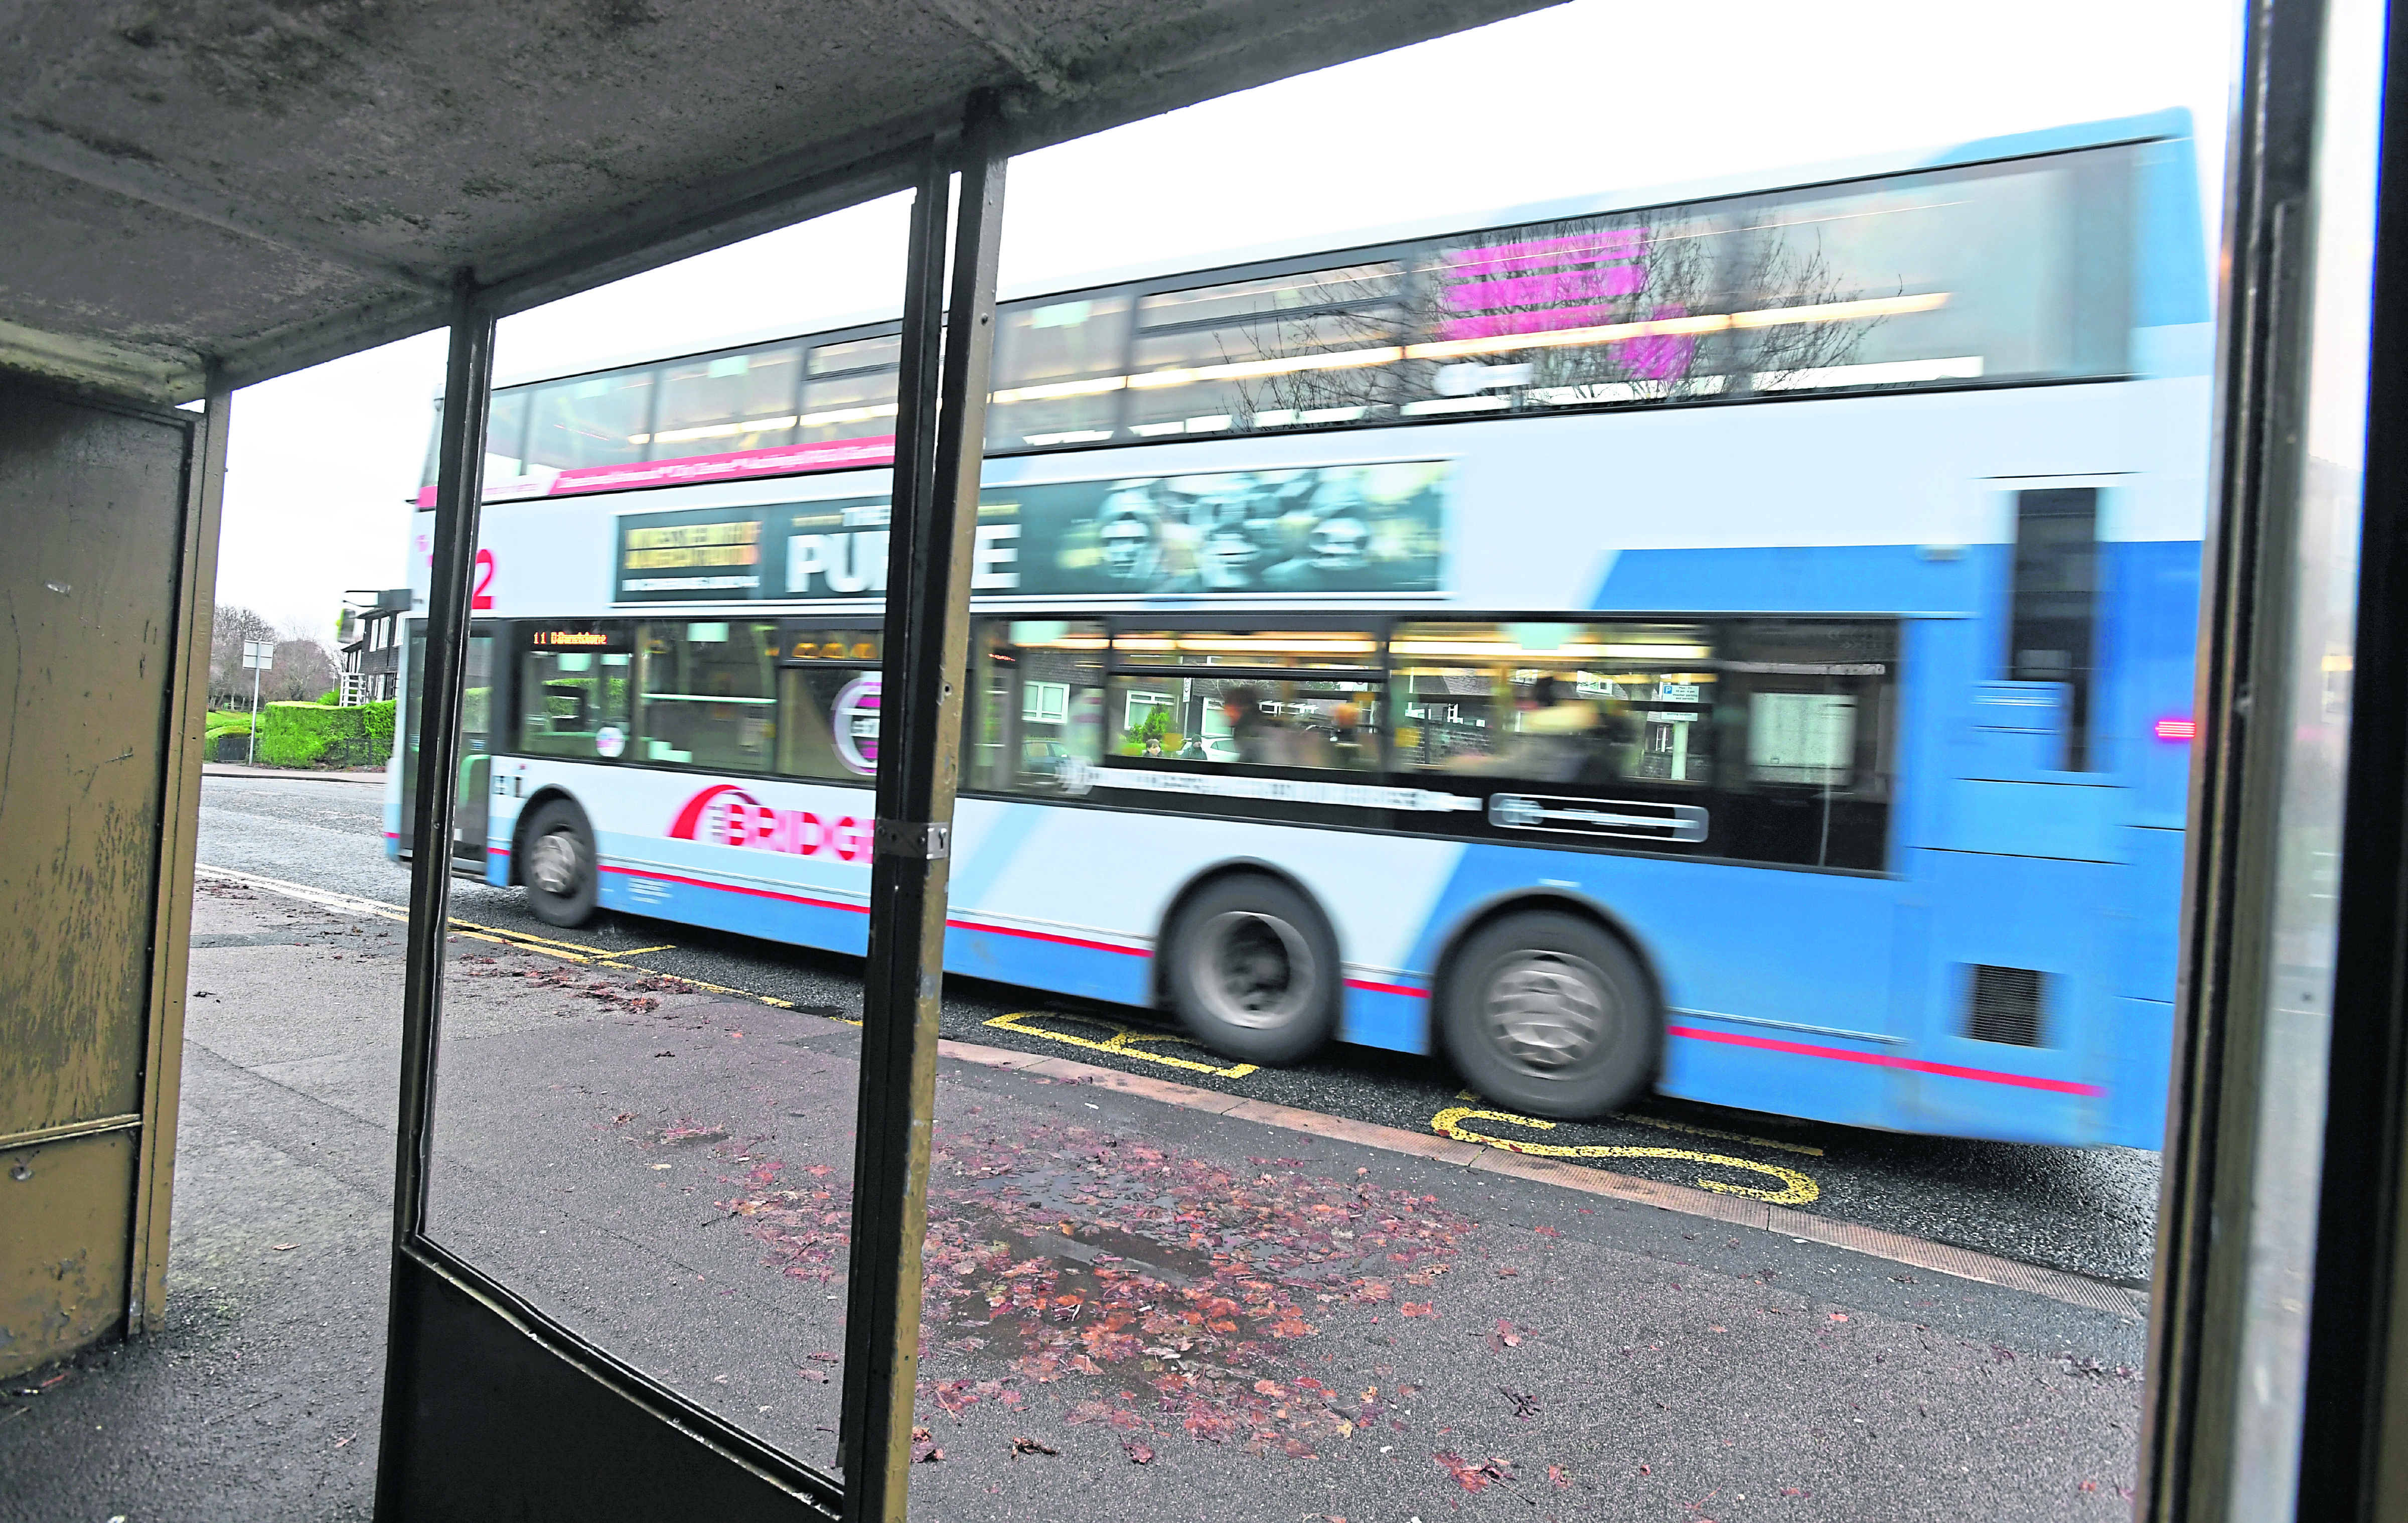 Aberdeen City Council is spending thousands of pounds in the repair of bus stops after they have been vandalised.